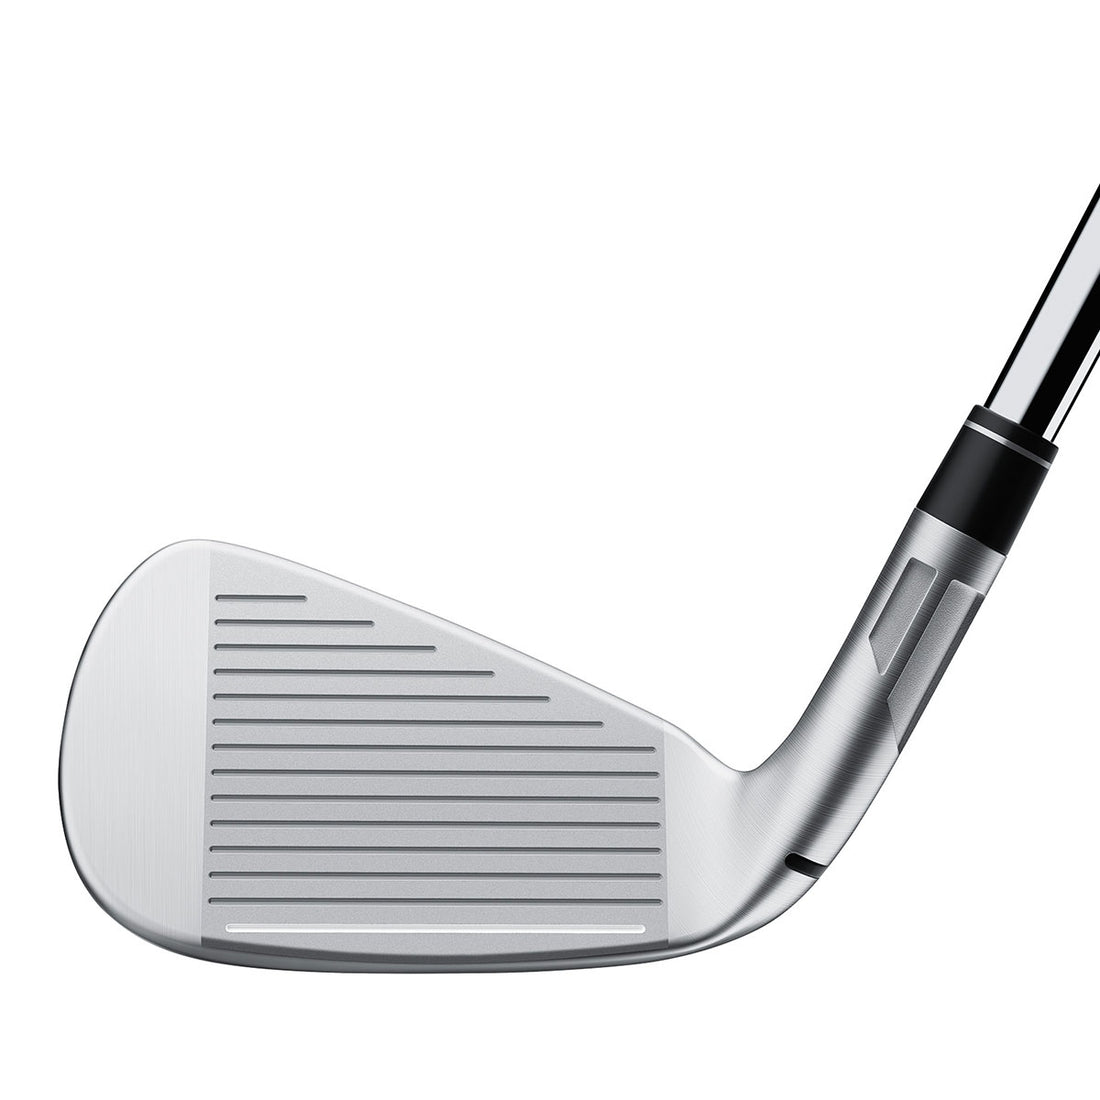 TAYLORMADE STEALTH IRONS